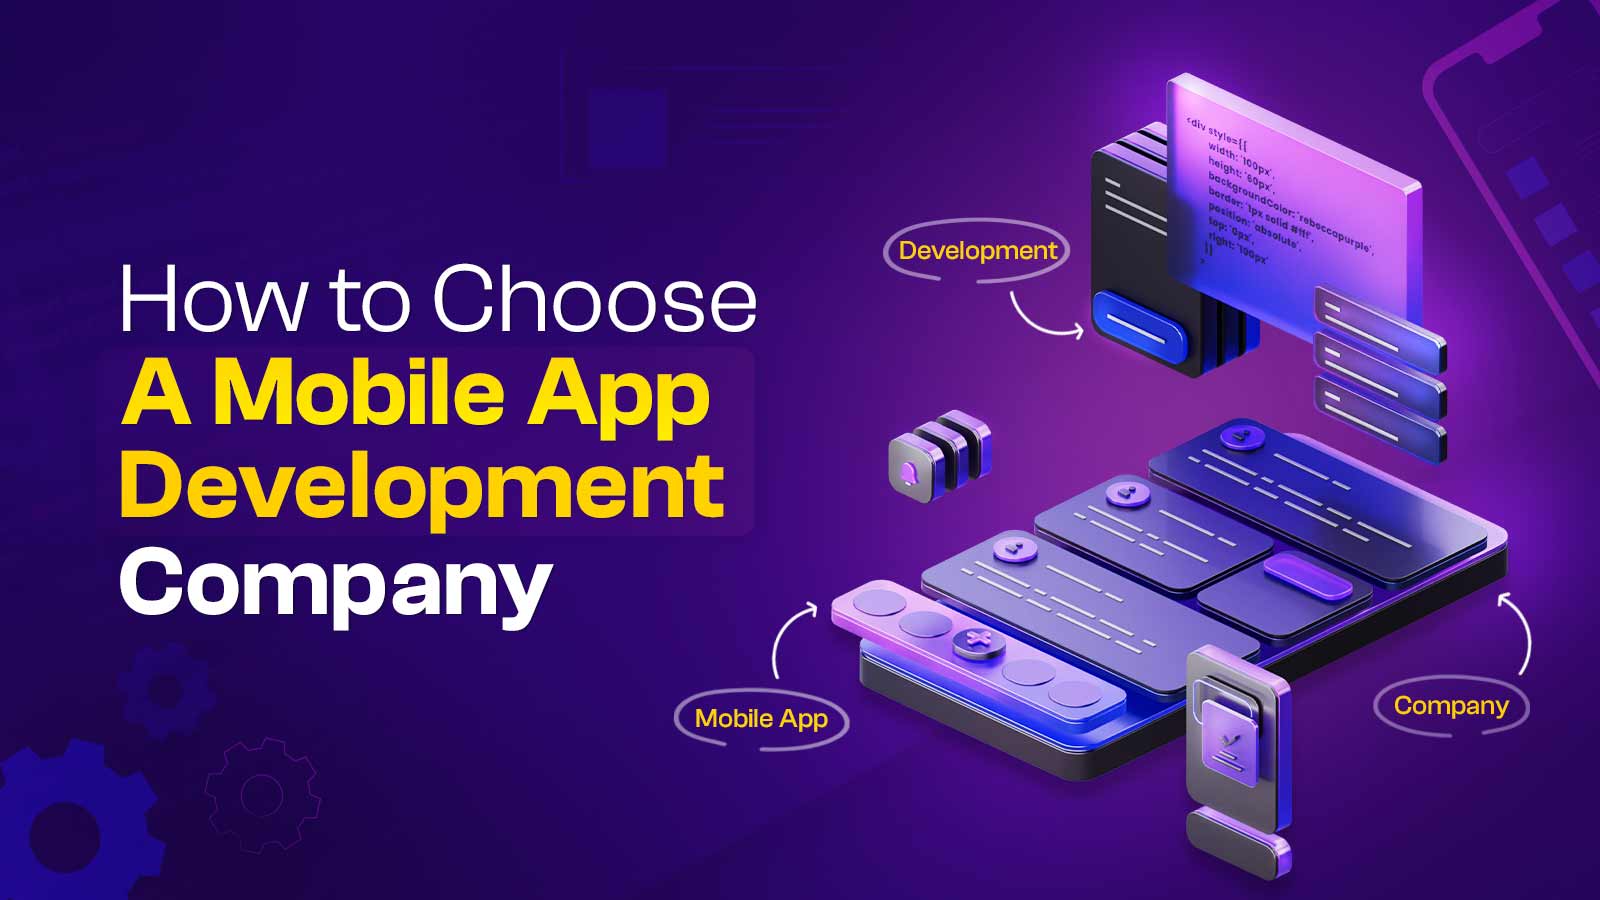 How To Choose A Mobile App Development Company? In Brief